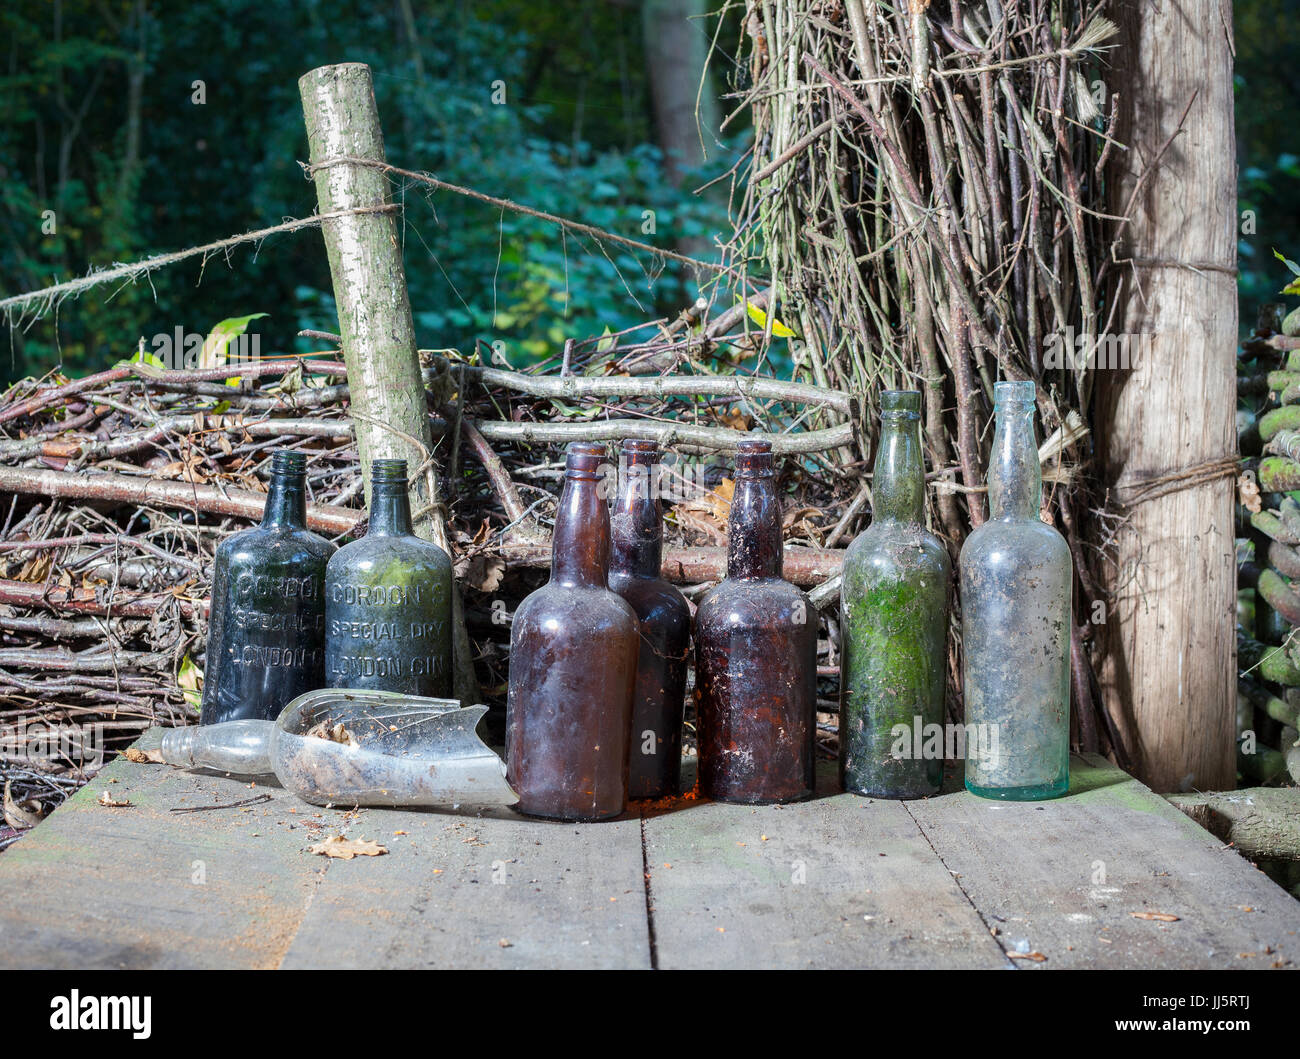 Dusty old bottles owned by Mark Eccleston former railway signaller, who rents seven acres of reclaimed woodland in Telford, Shropshire. United Kingdom Stock Photo